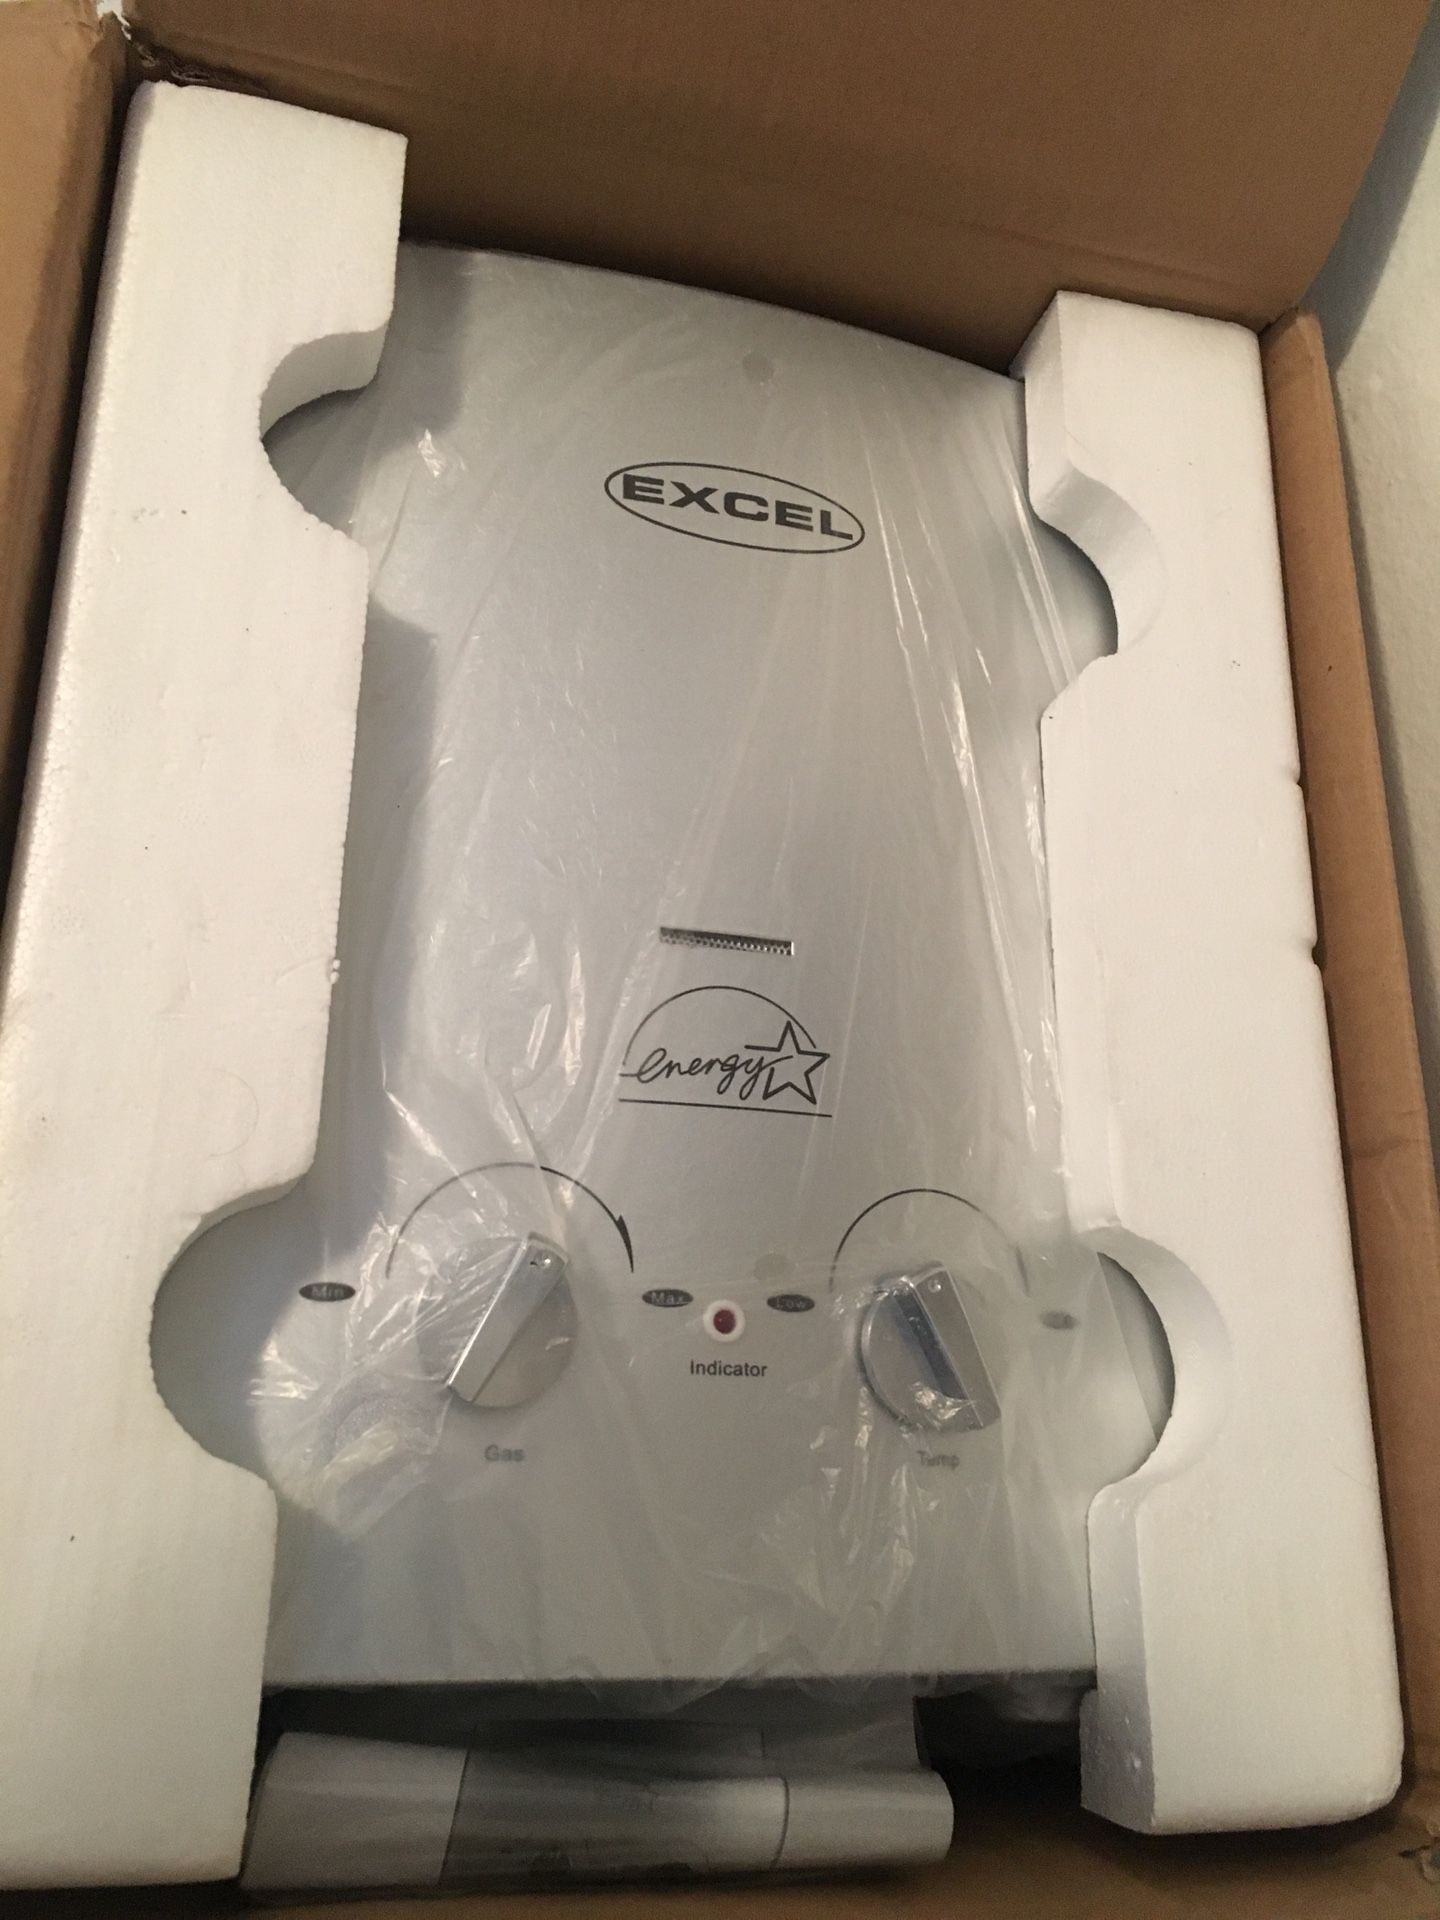 Excel tankless water heater (gas)